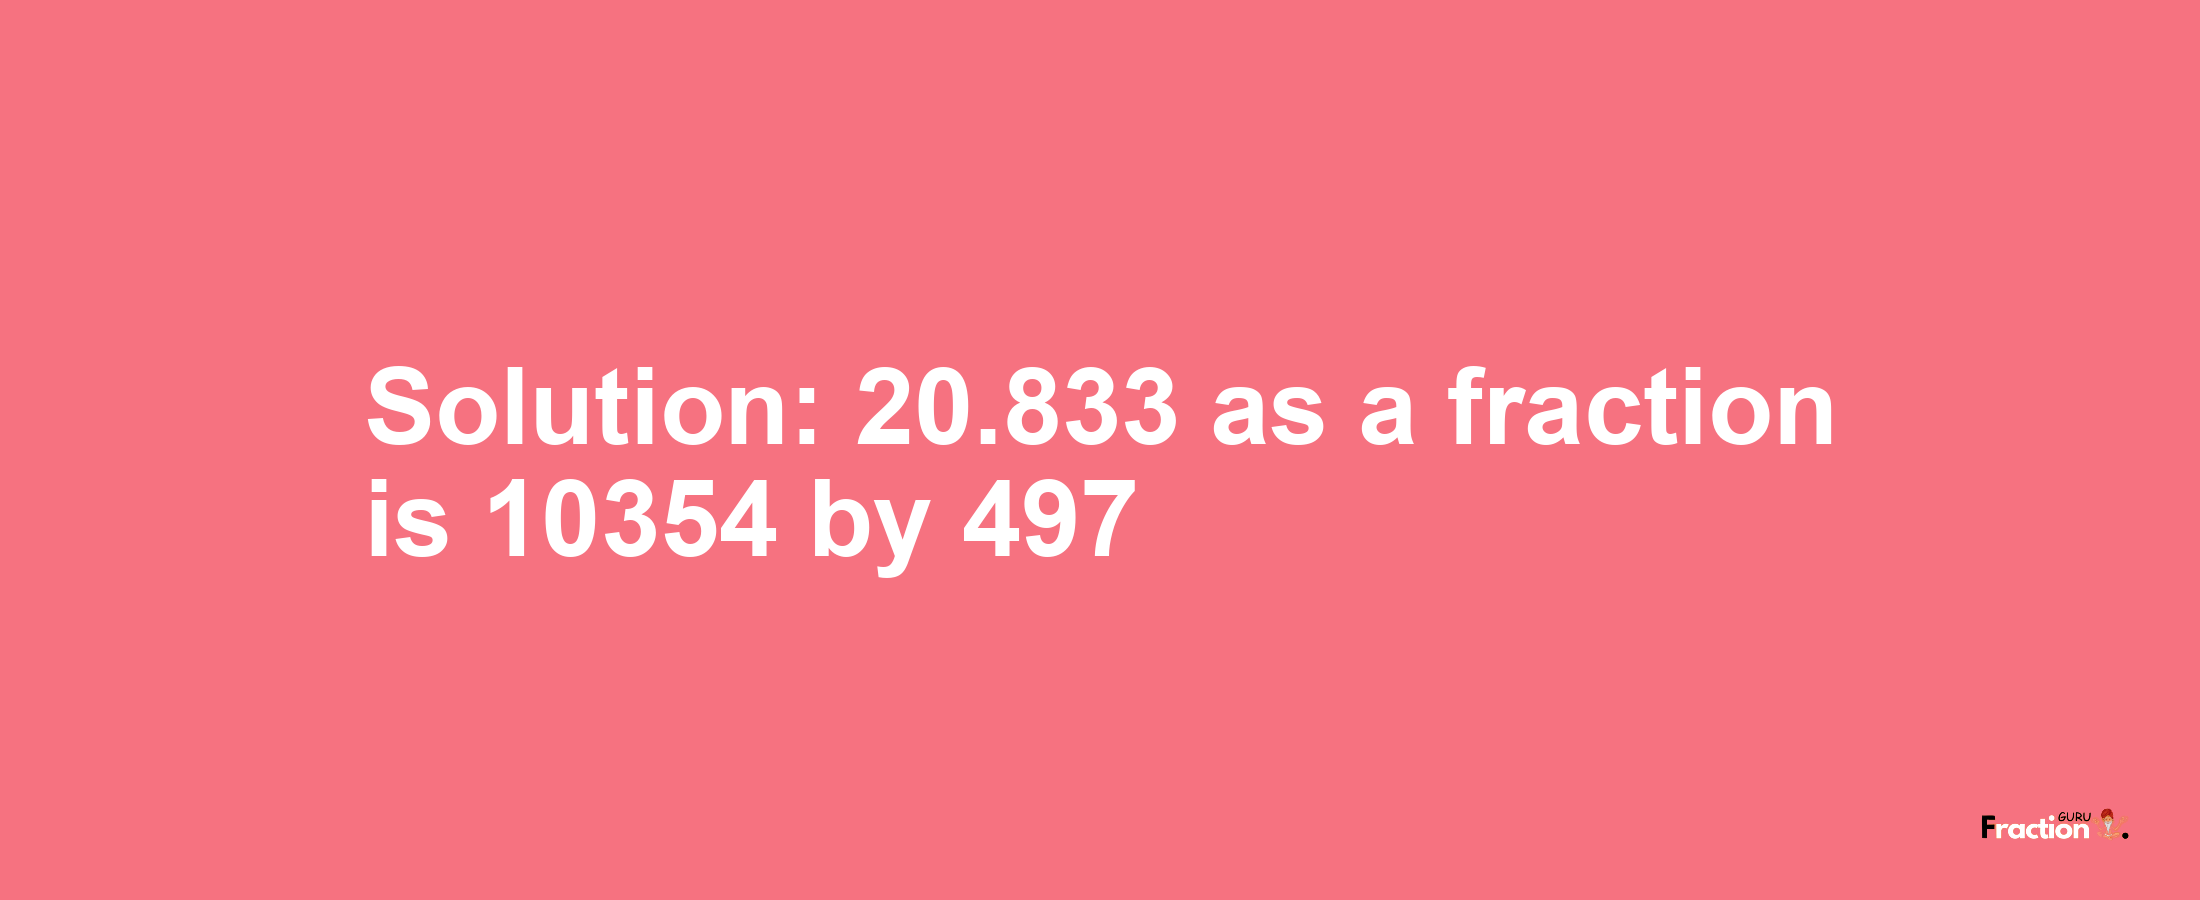 Solution:20.833 as a fraction is 10354/497